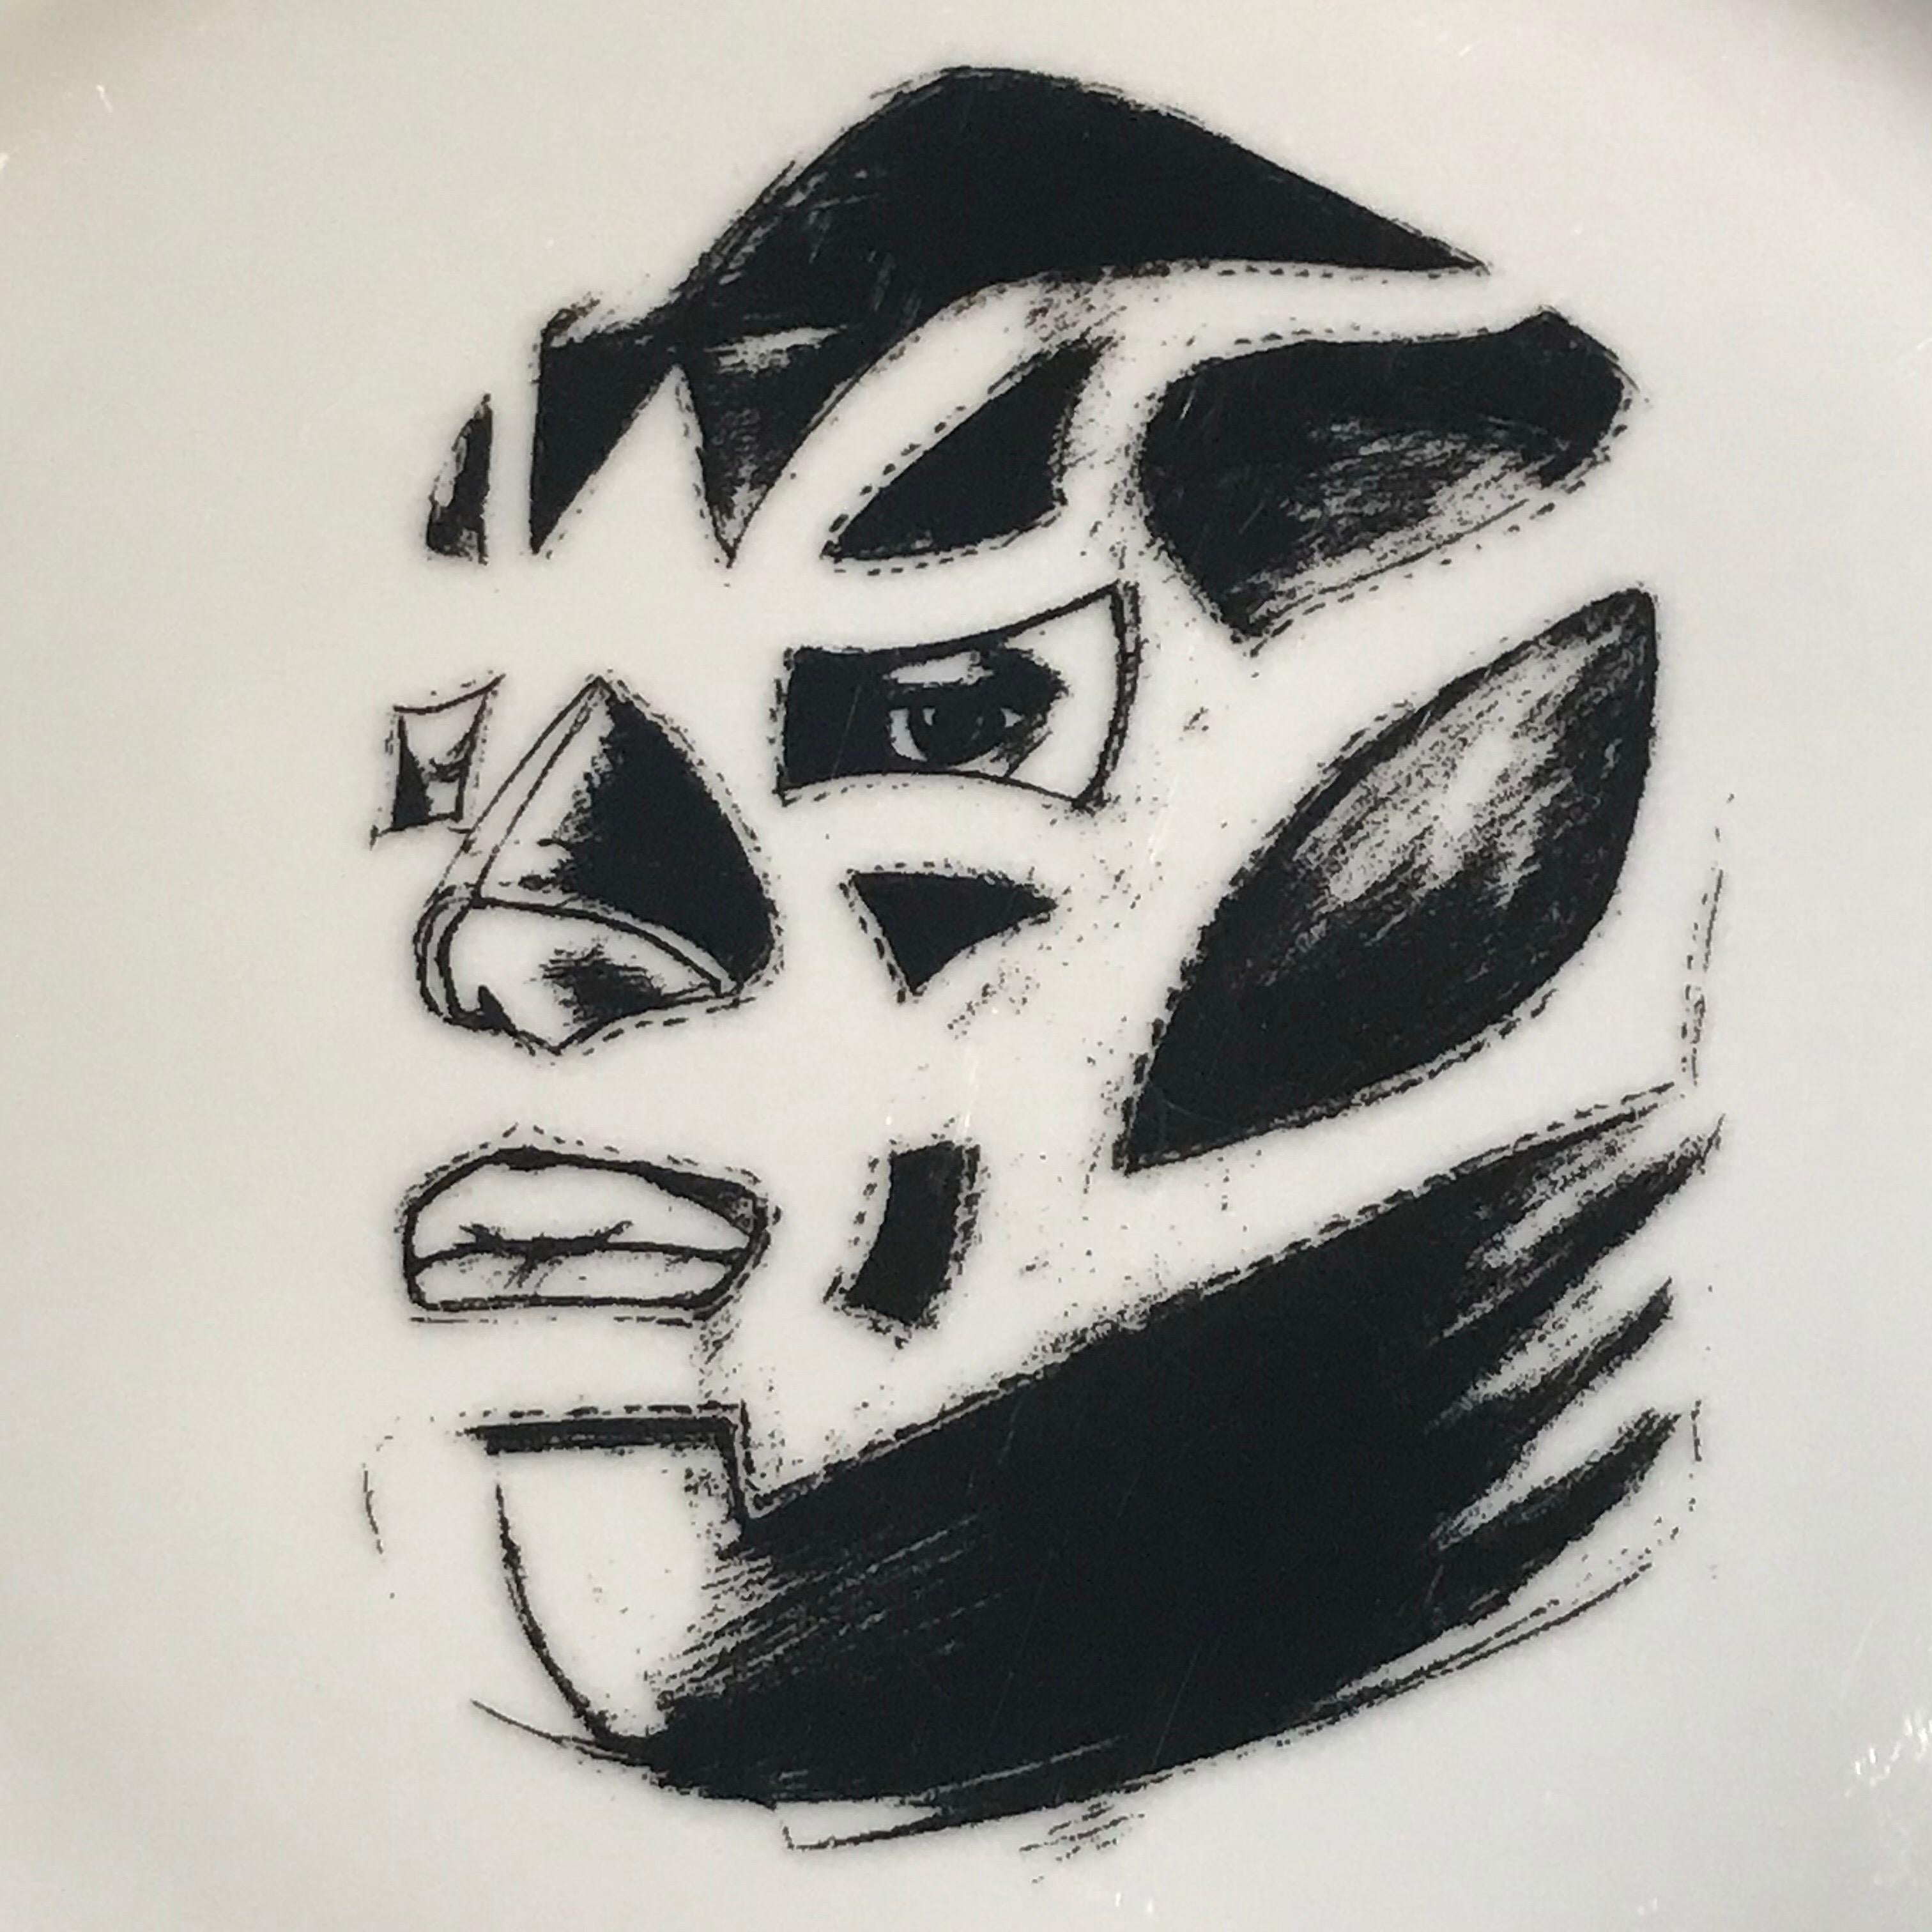 Ceramic plate designed by artist Salomon Huerta, featuring art inspired by the Mexican wrestler or luchador 